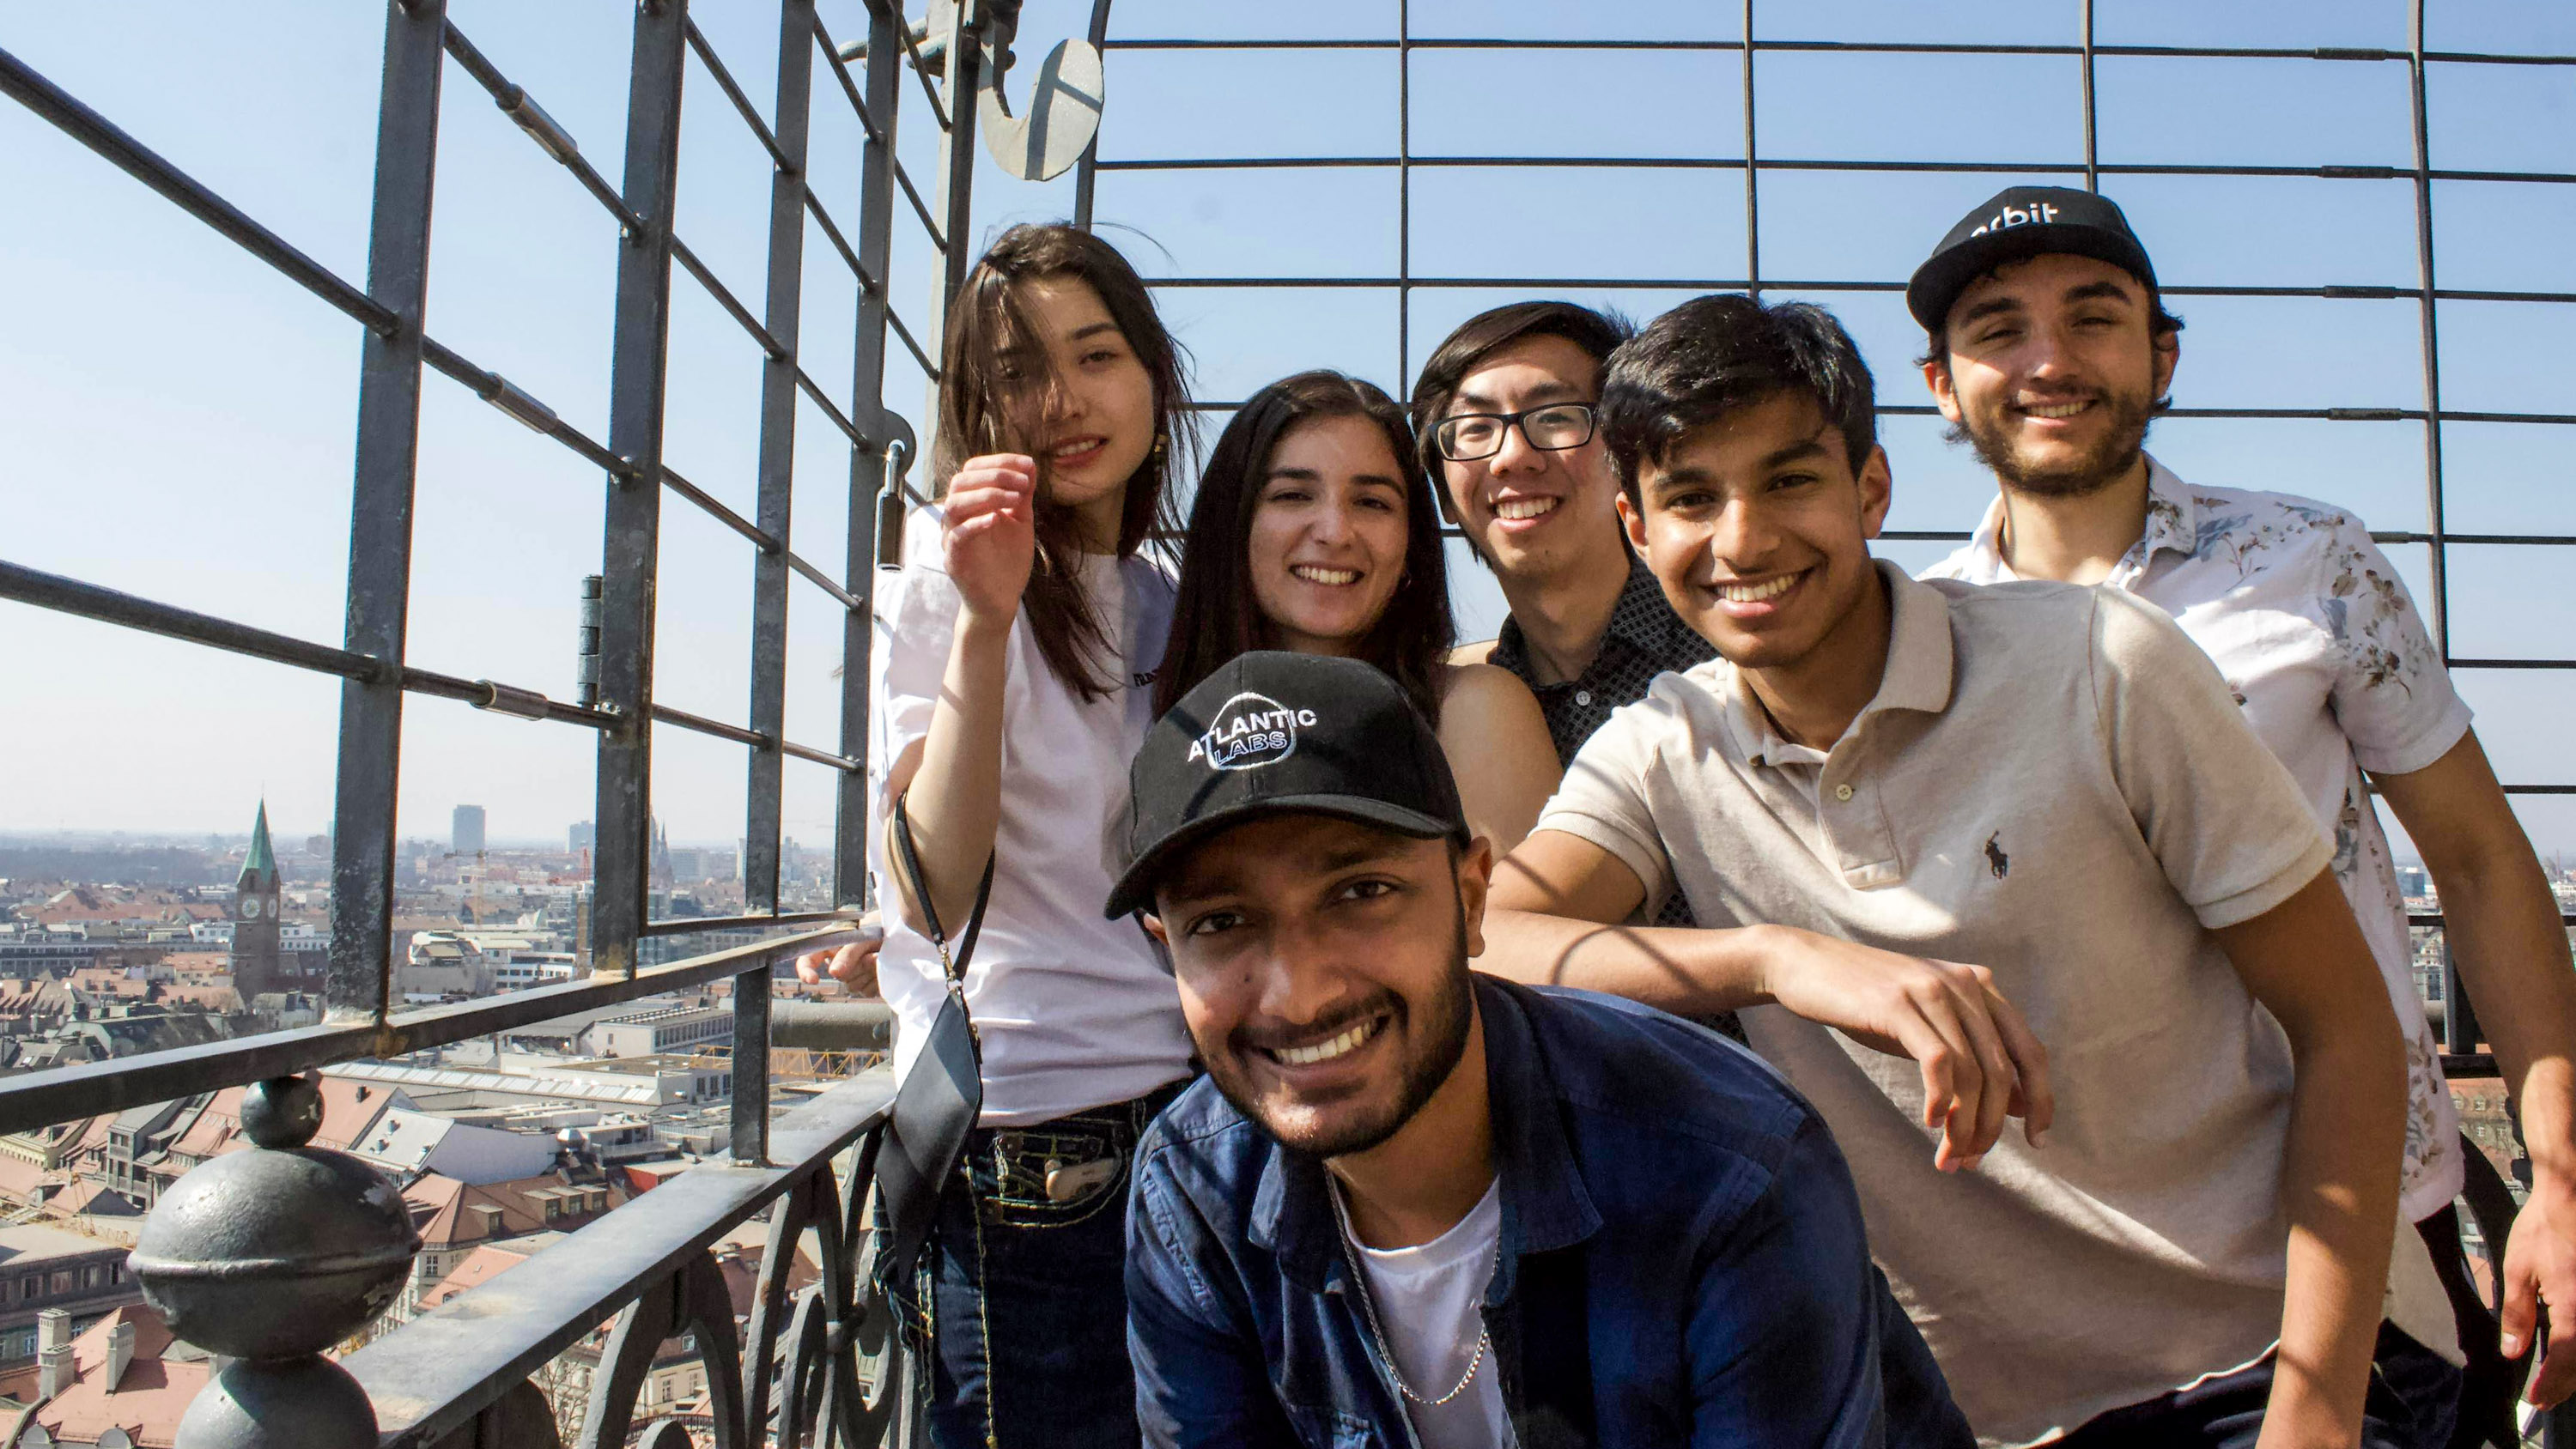 group of students posing on a viewing balcony overlooking a city